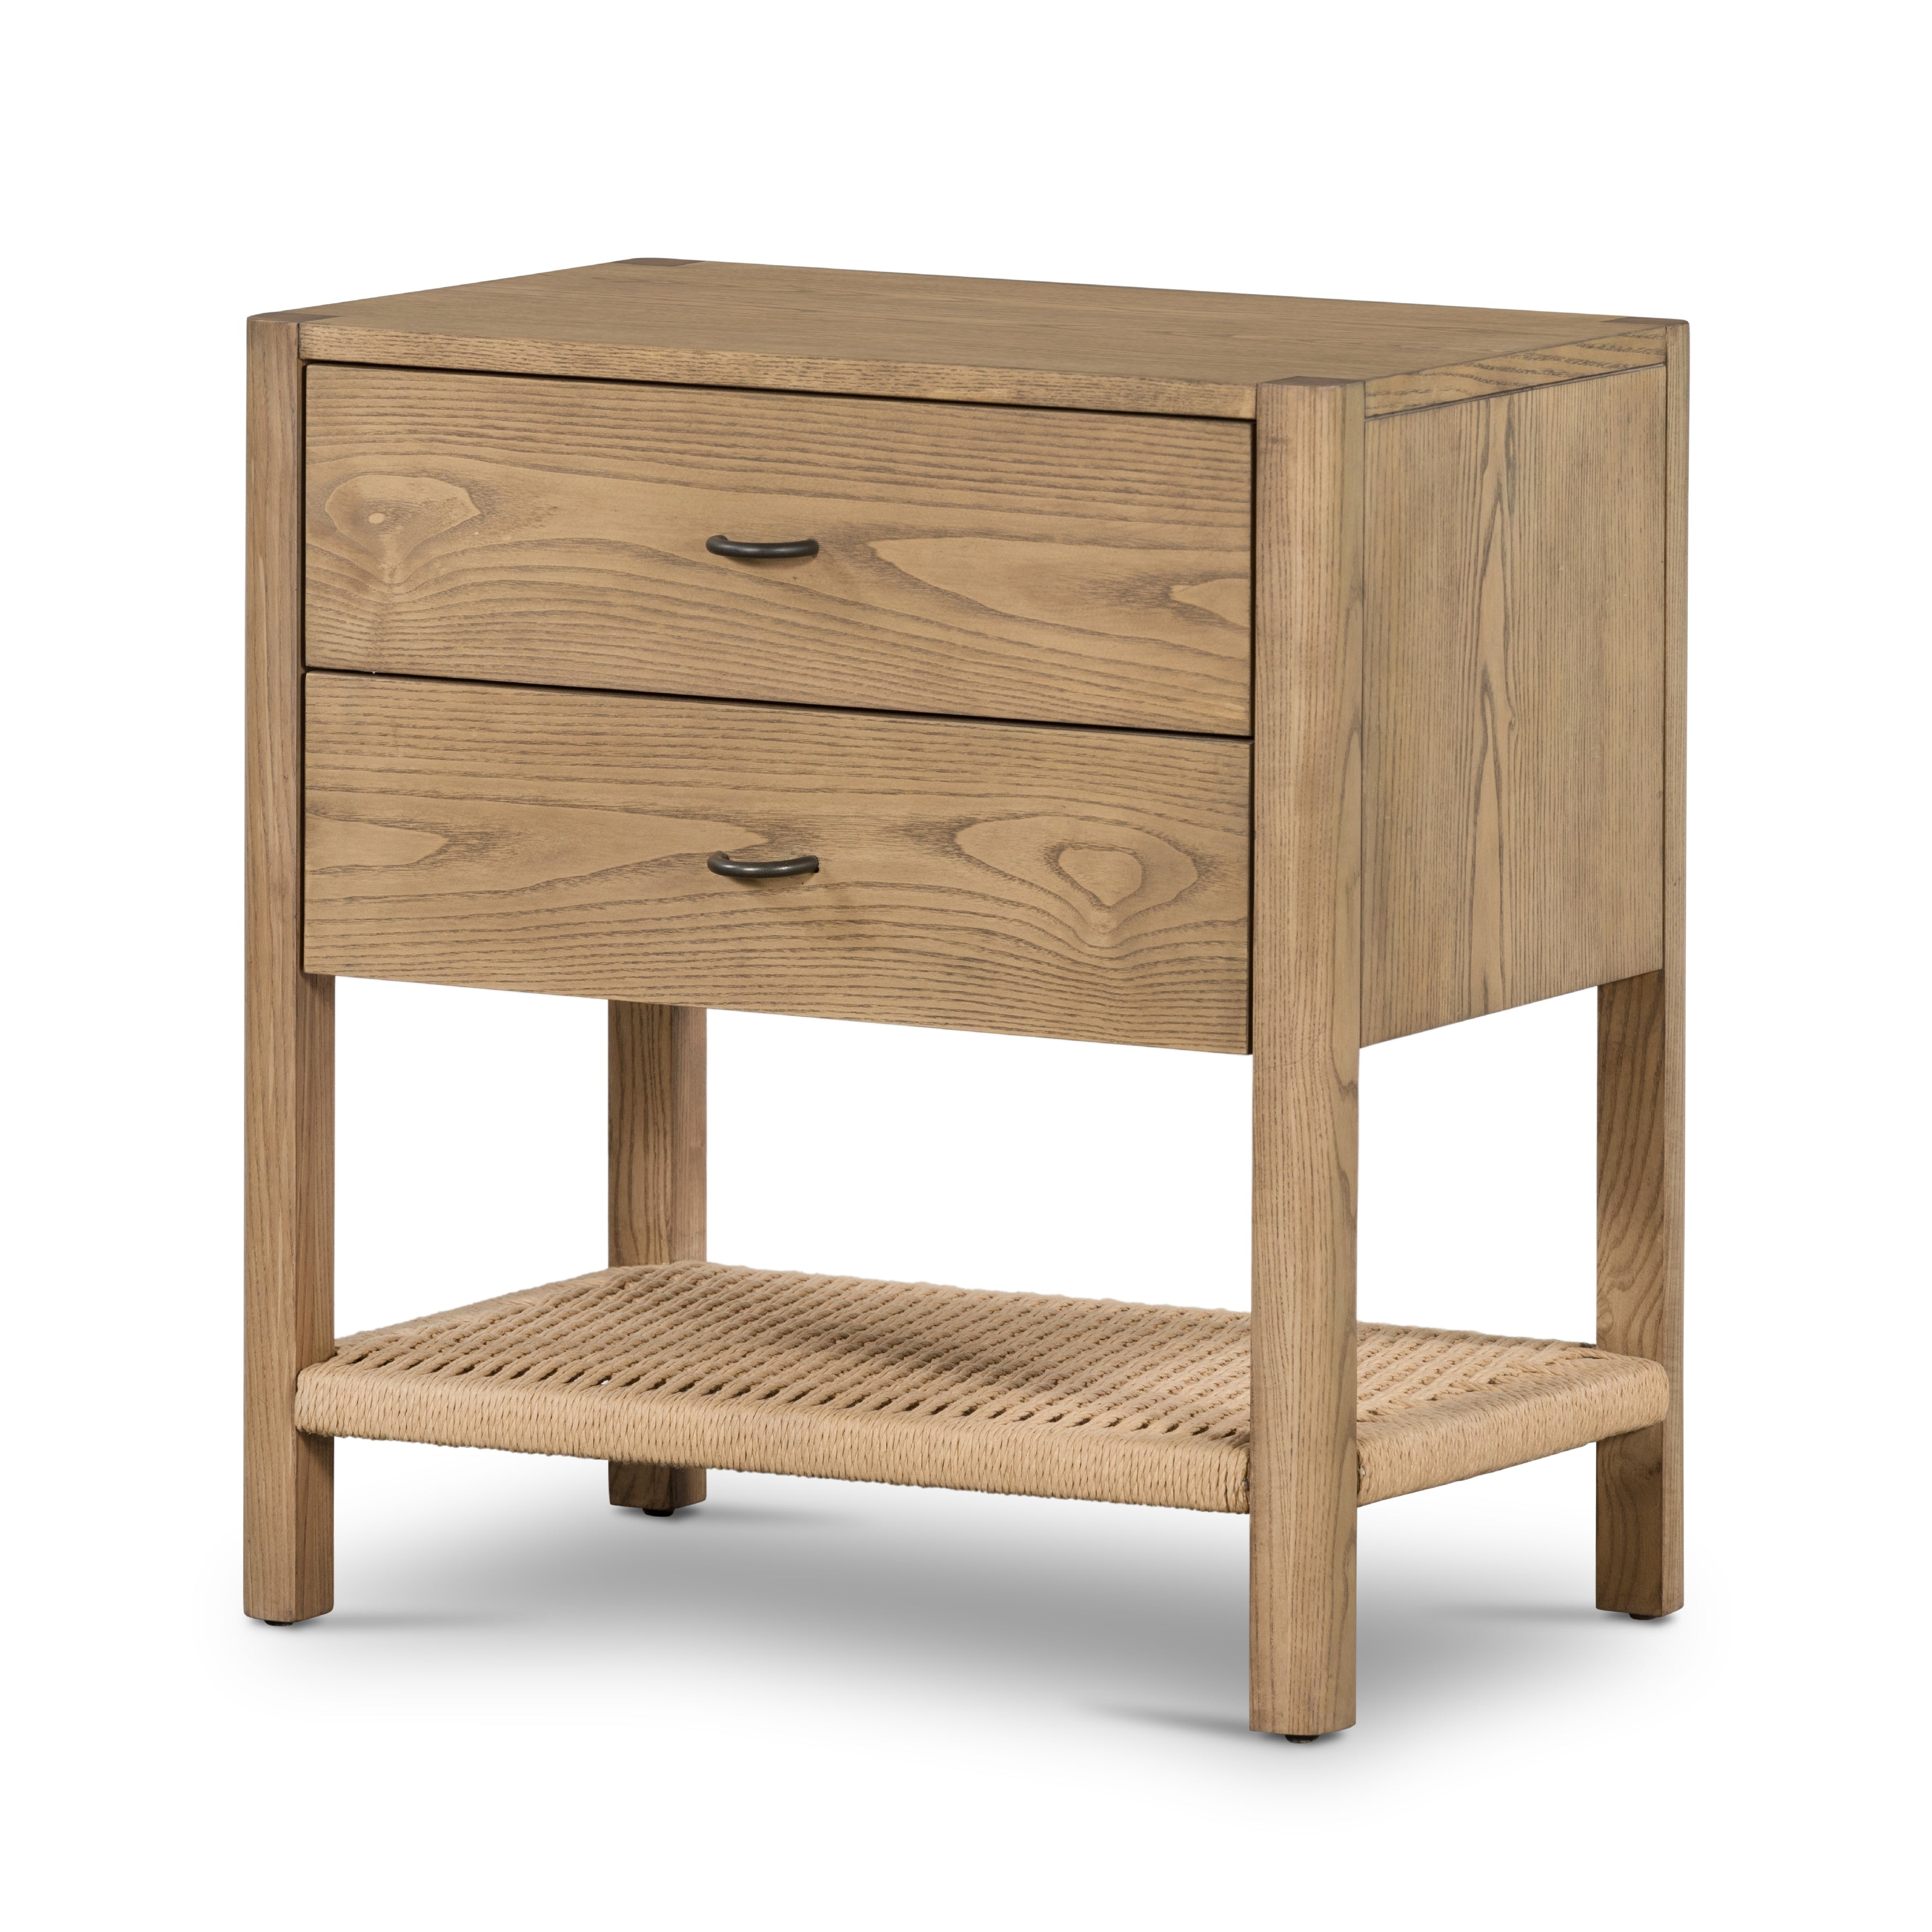 Simple yet refined, a Danish design-influenced nightstand is made from solid ash, with iron hardware finished in a sleek gunmetal. Dual drawers bring generous storage space to the bedside, while stretcher-style shelving made from woven paper cord doles a textural finishing touch.